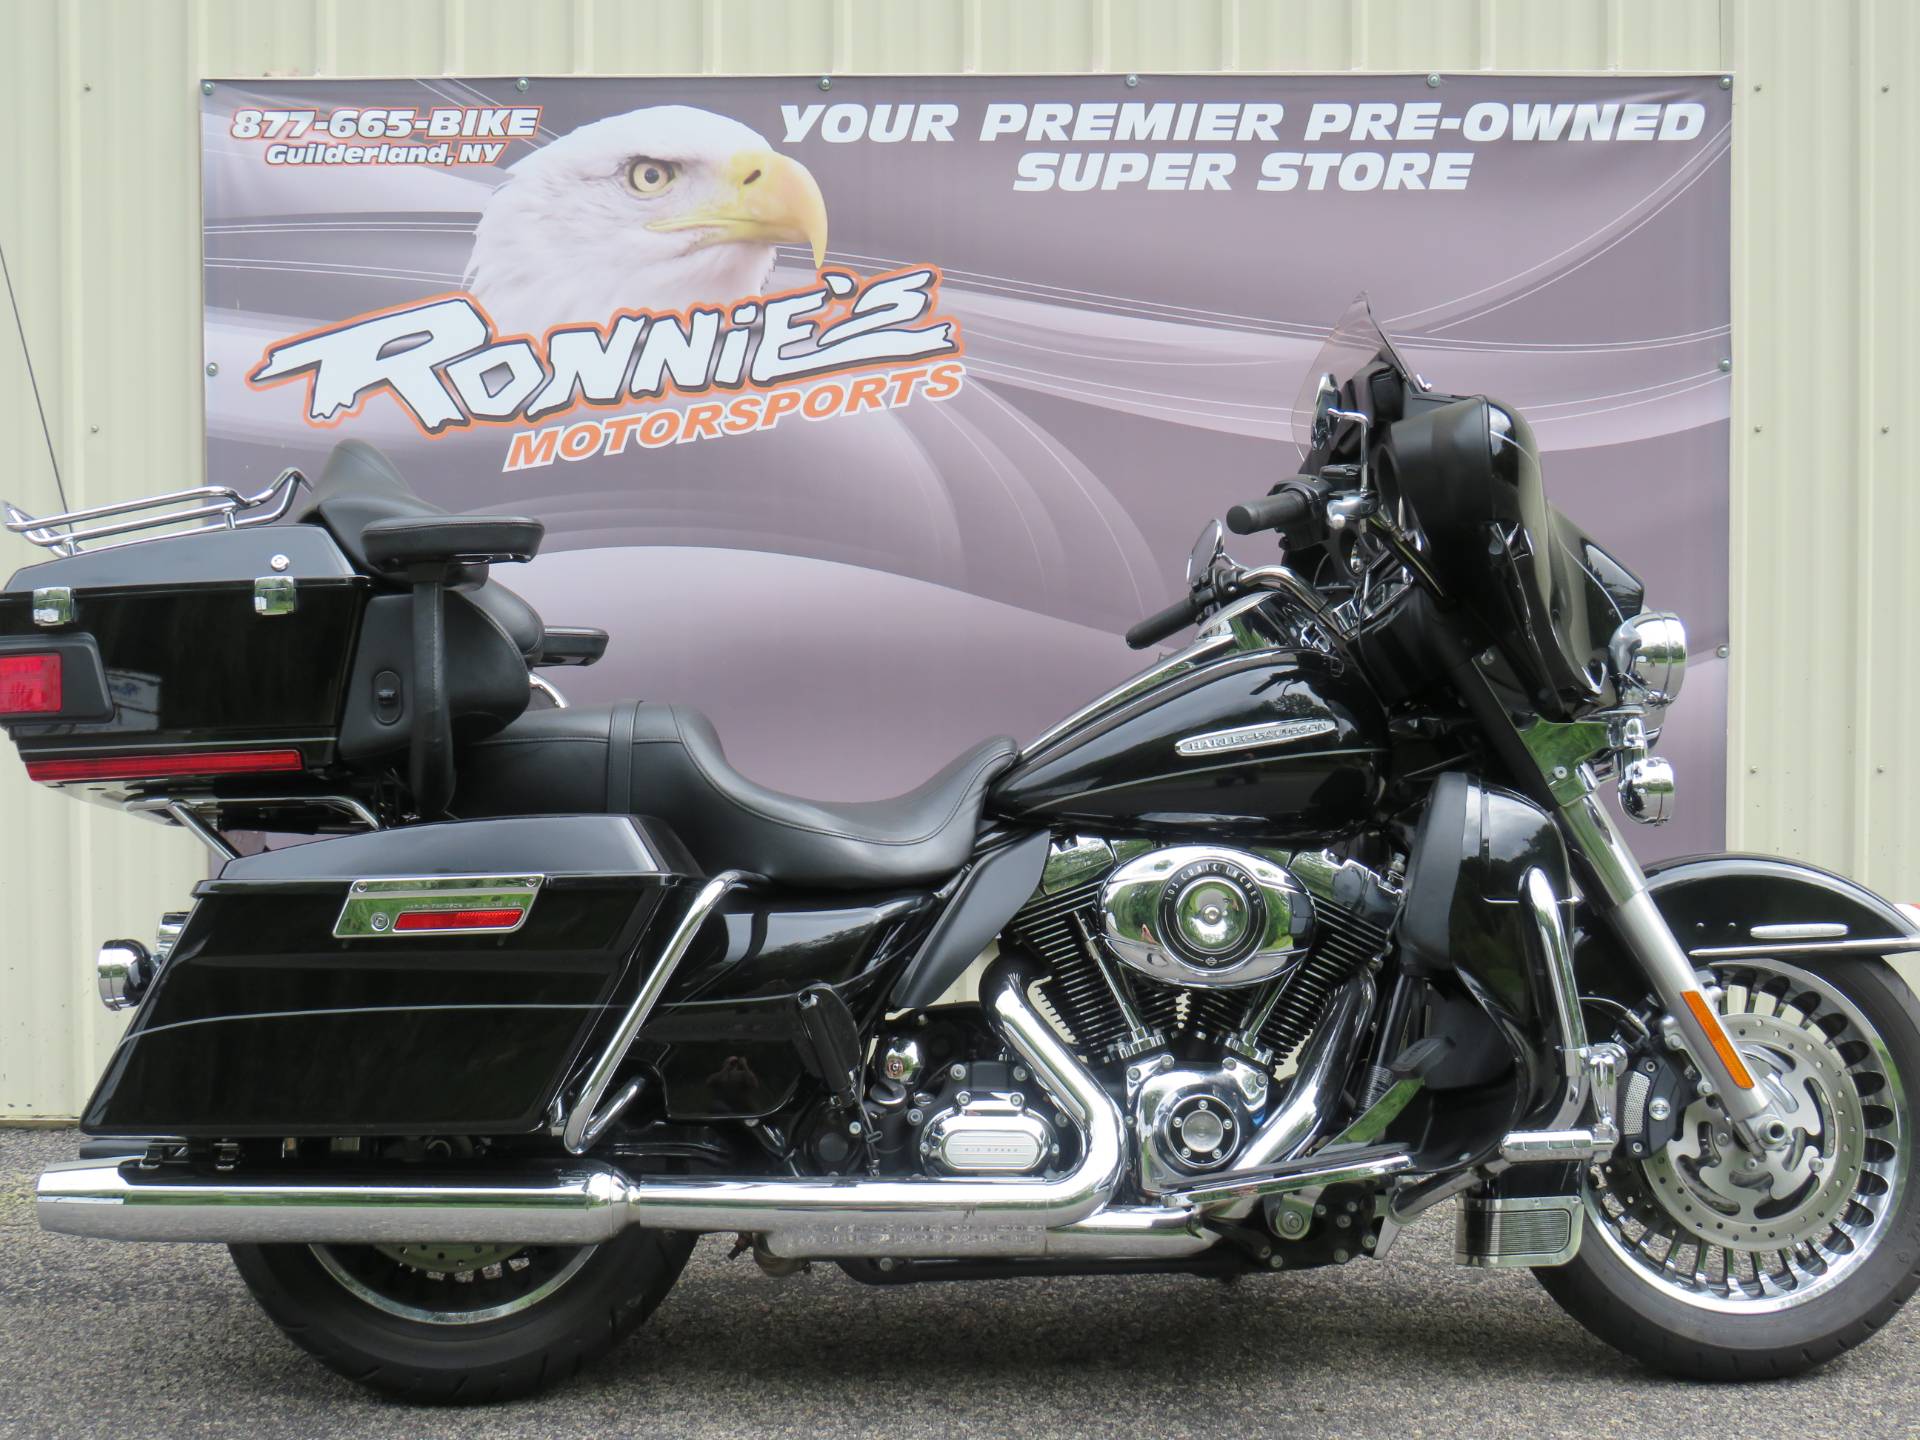 Used 2013 Harley Davidson Electra Glide Ultra Limited Motorcycles In Guilderland Ny Stock Number 609869 Ronniesmotorsports Com